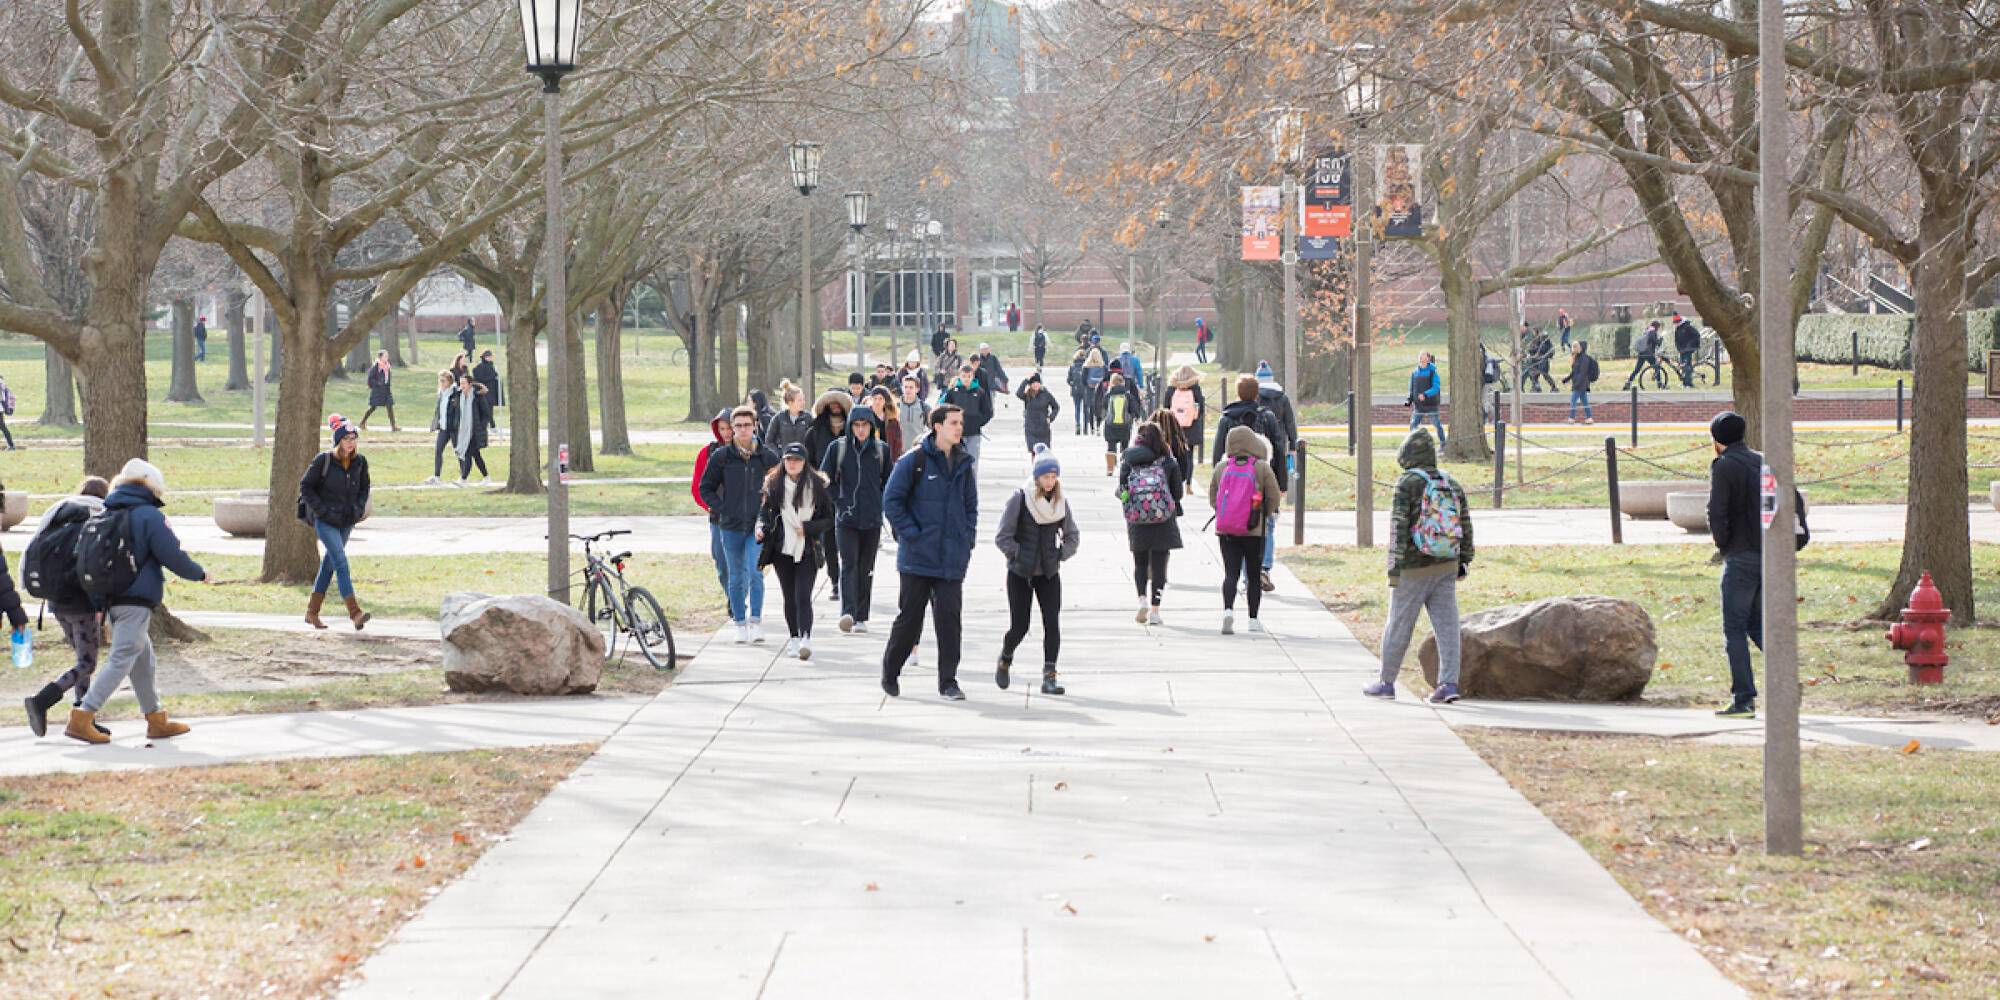 Students walking to class on the sidewalk south of Gregory Hall looking towards Temple Hoyne Buell Hall.